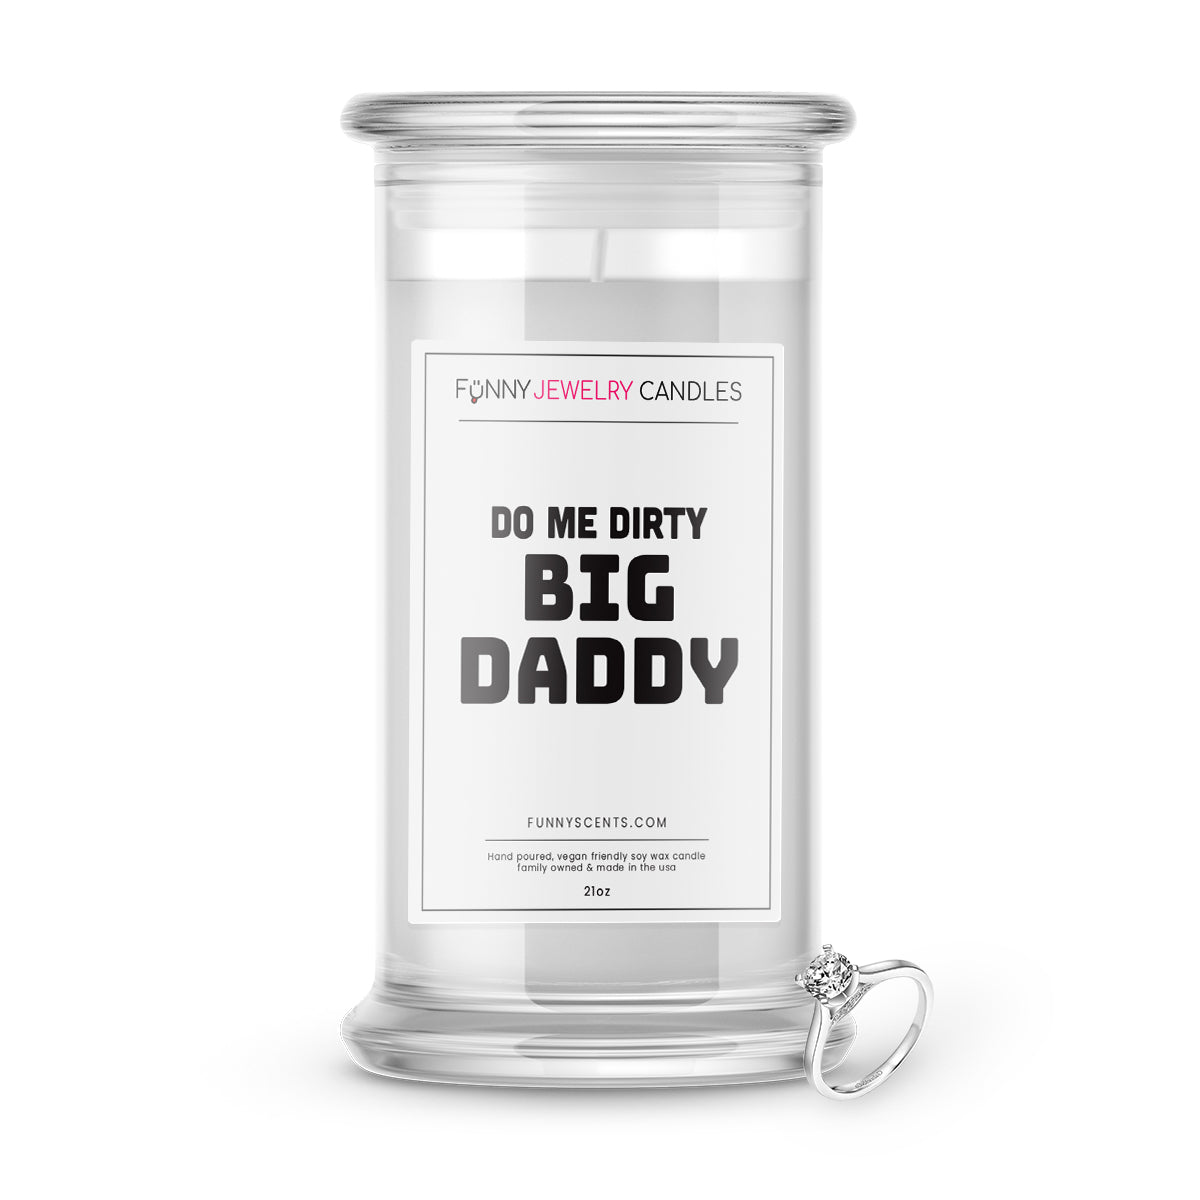 Do Me Dirty Big Daddy Jewelry Funny Candles